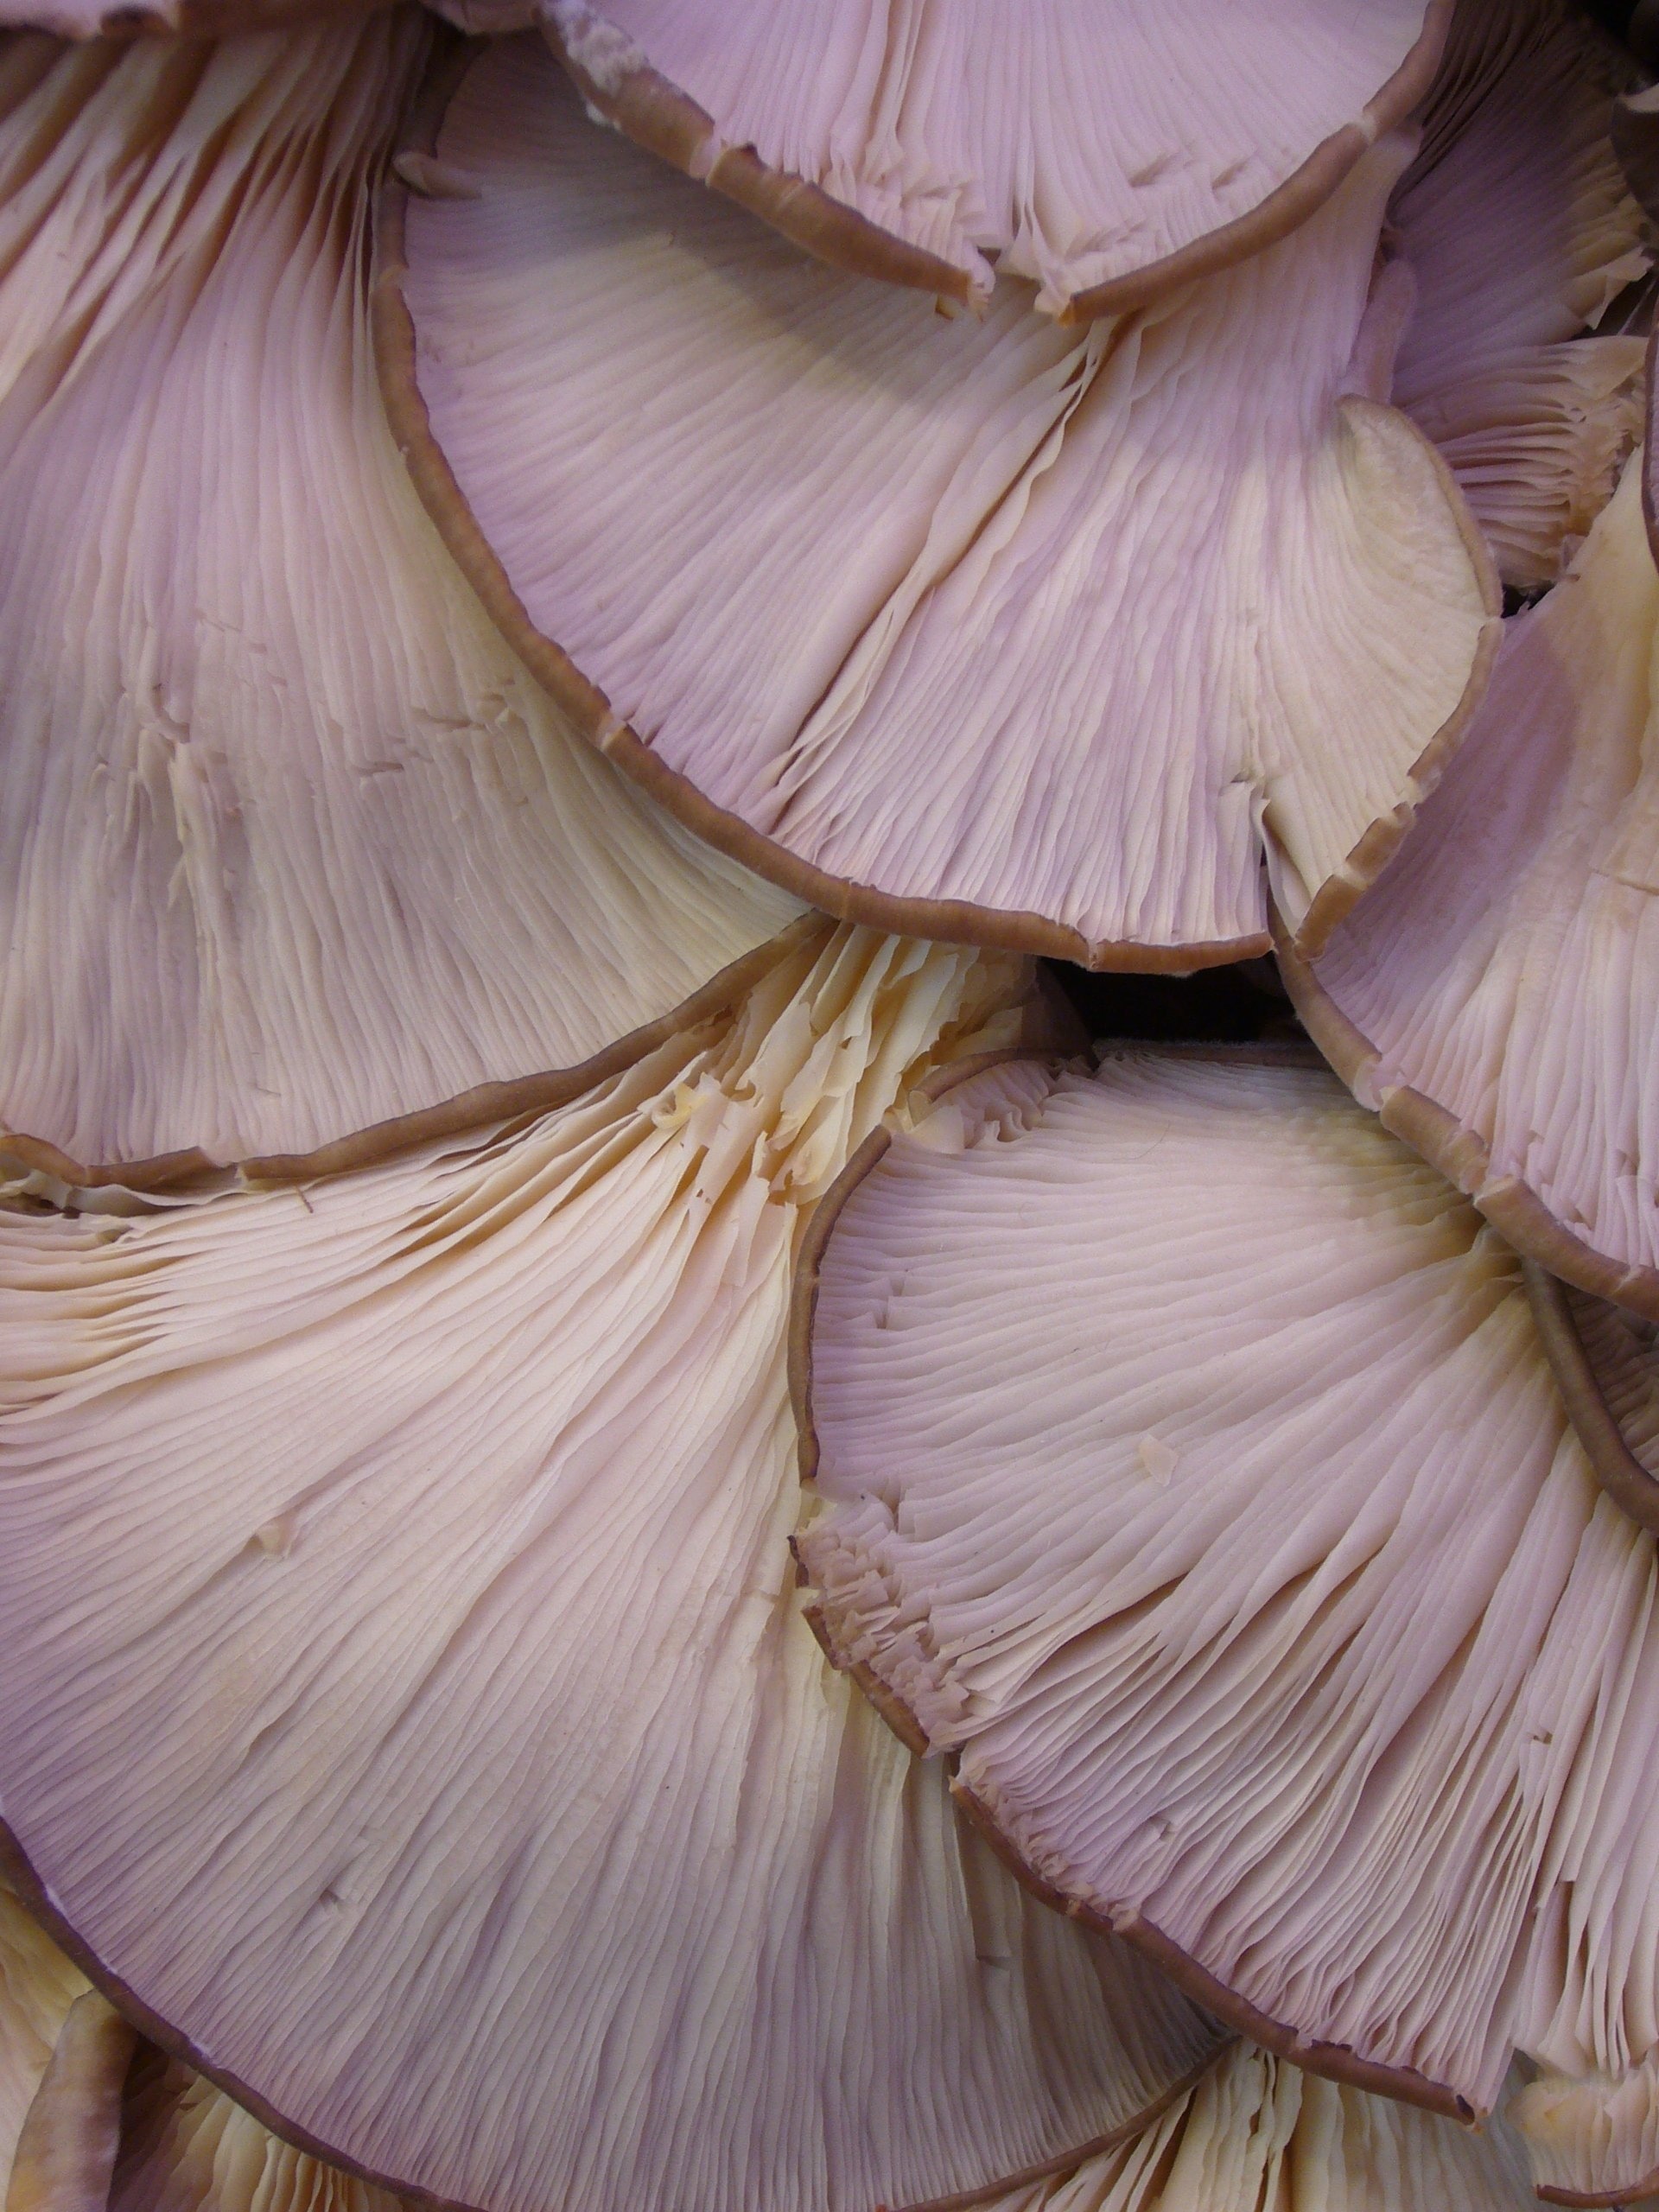 Oyster mushrooms, Culinary delights, Royalty-free images, High-quality, 1920x2560 HD Handy